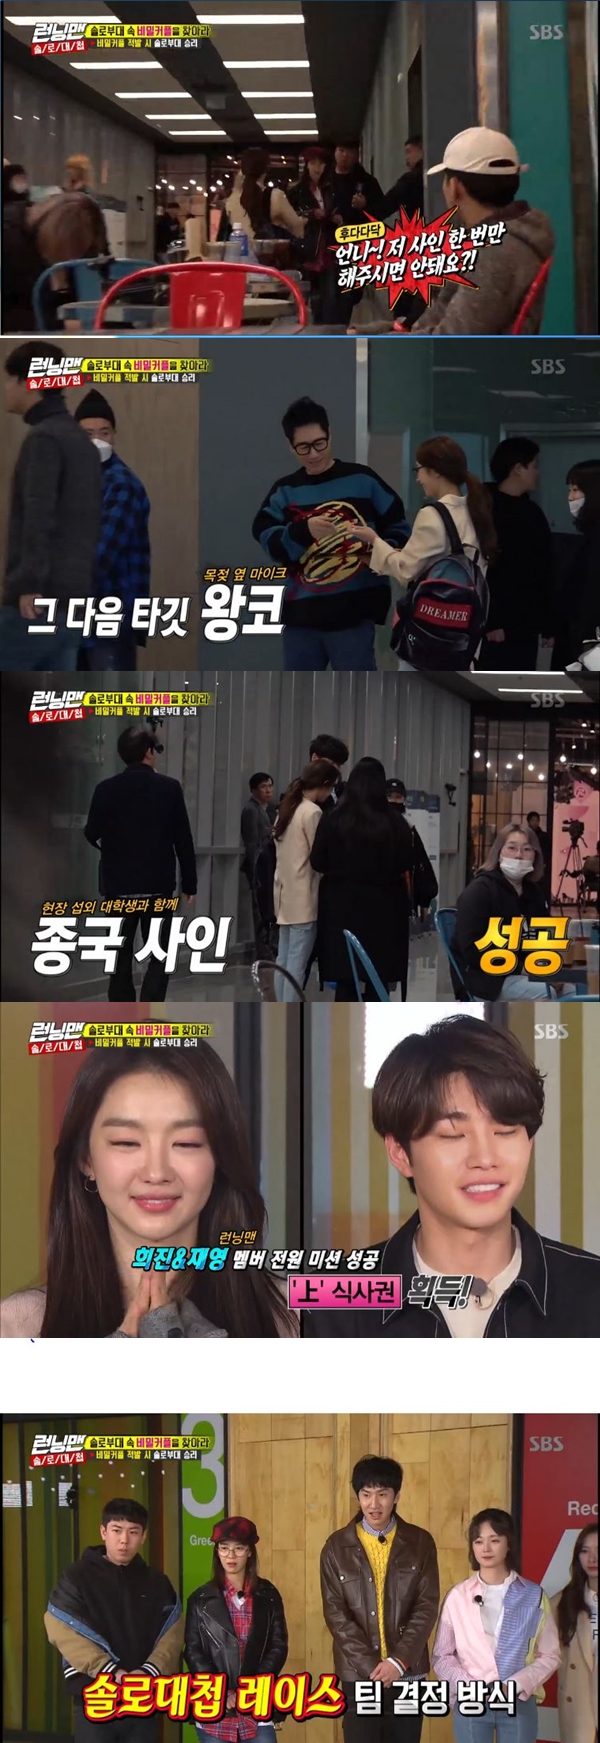 Guests succeeded in pre-mission against Betarang members.In the SBS entertainment program Running Man broadcasted on the afternoon of the 31st, HeeJin, Jaeyoung and Bona came out as guests and performed Solo Counterfeit race with the members.The members prepared the recording without knowing who was the guest before the opening. Jae-young received a mission to the crew to fill the microphone without revealing the identity to the members.Turning into a staff member, he deceived the members, and Jae-young filled the members with a microphone.But he was embarrassed and laughed by filling a microphone next to his neck milk, though Ji Suk-jin didnt notice, and he won the sang meal ticket.HeeJin then also succeeded in a pre-mission to everyone against the members; while Bona received the ha meal rights, signed only by the three members.Meanwhile, the members had to form a team with the guests and all tried to avoid Bona, who had a ha meal.